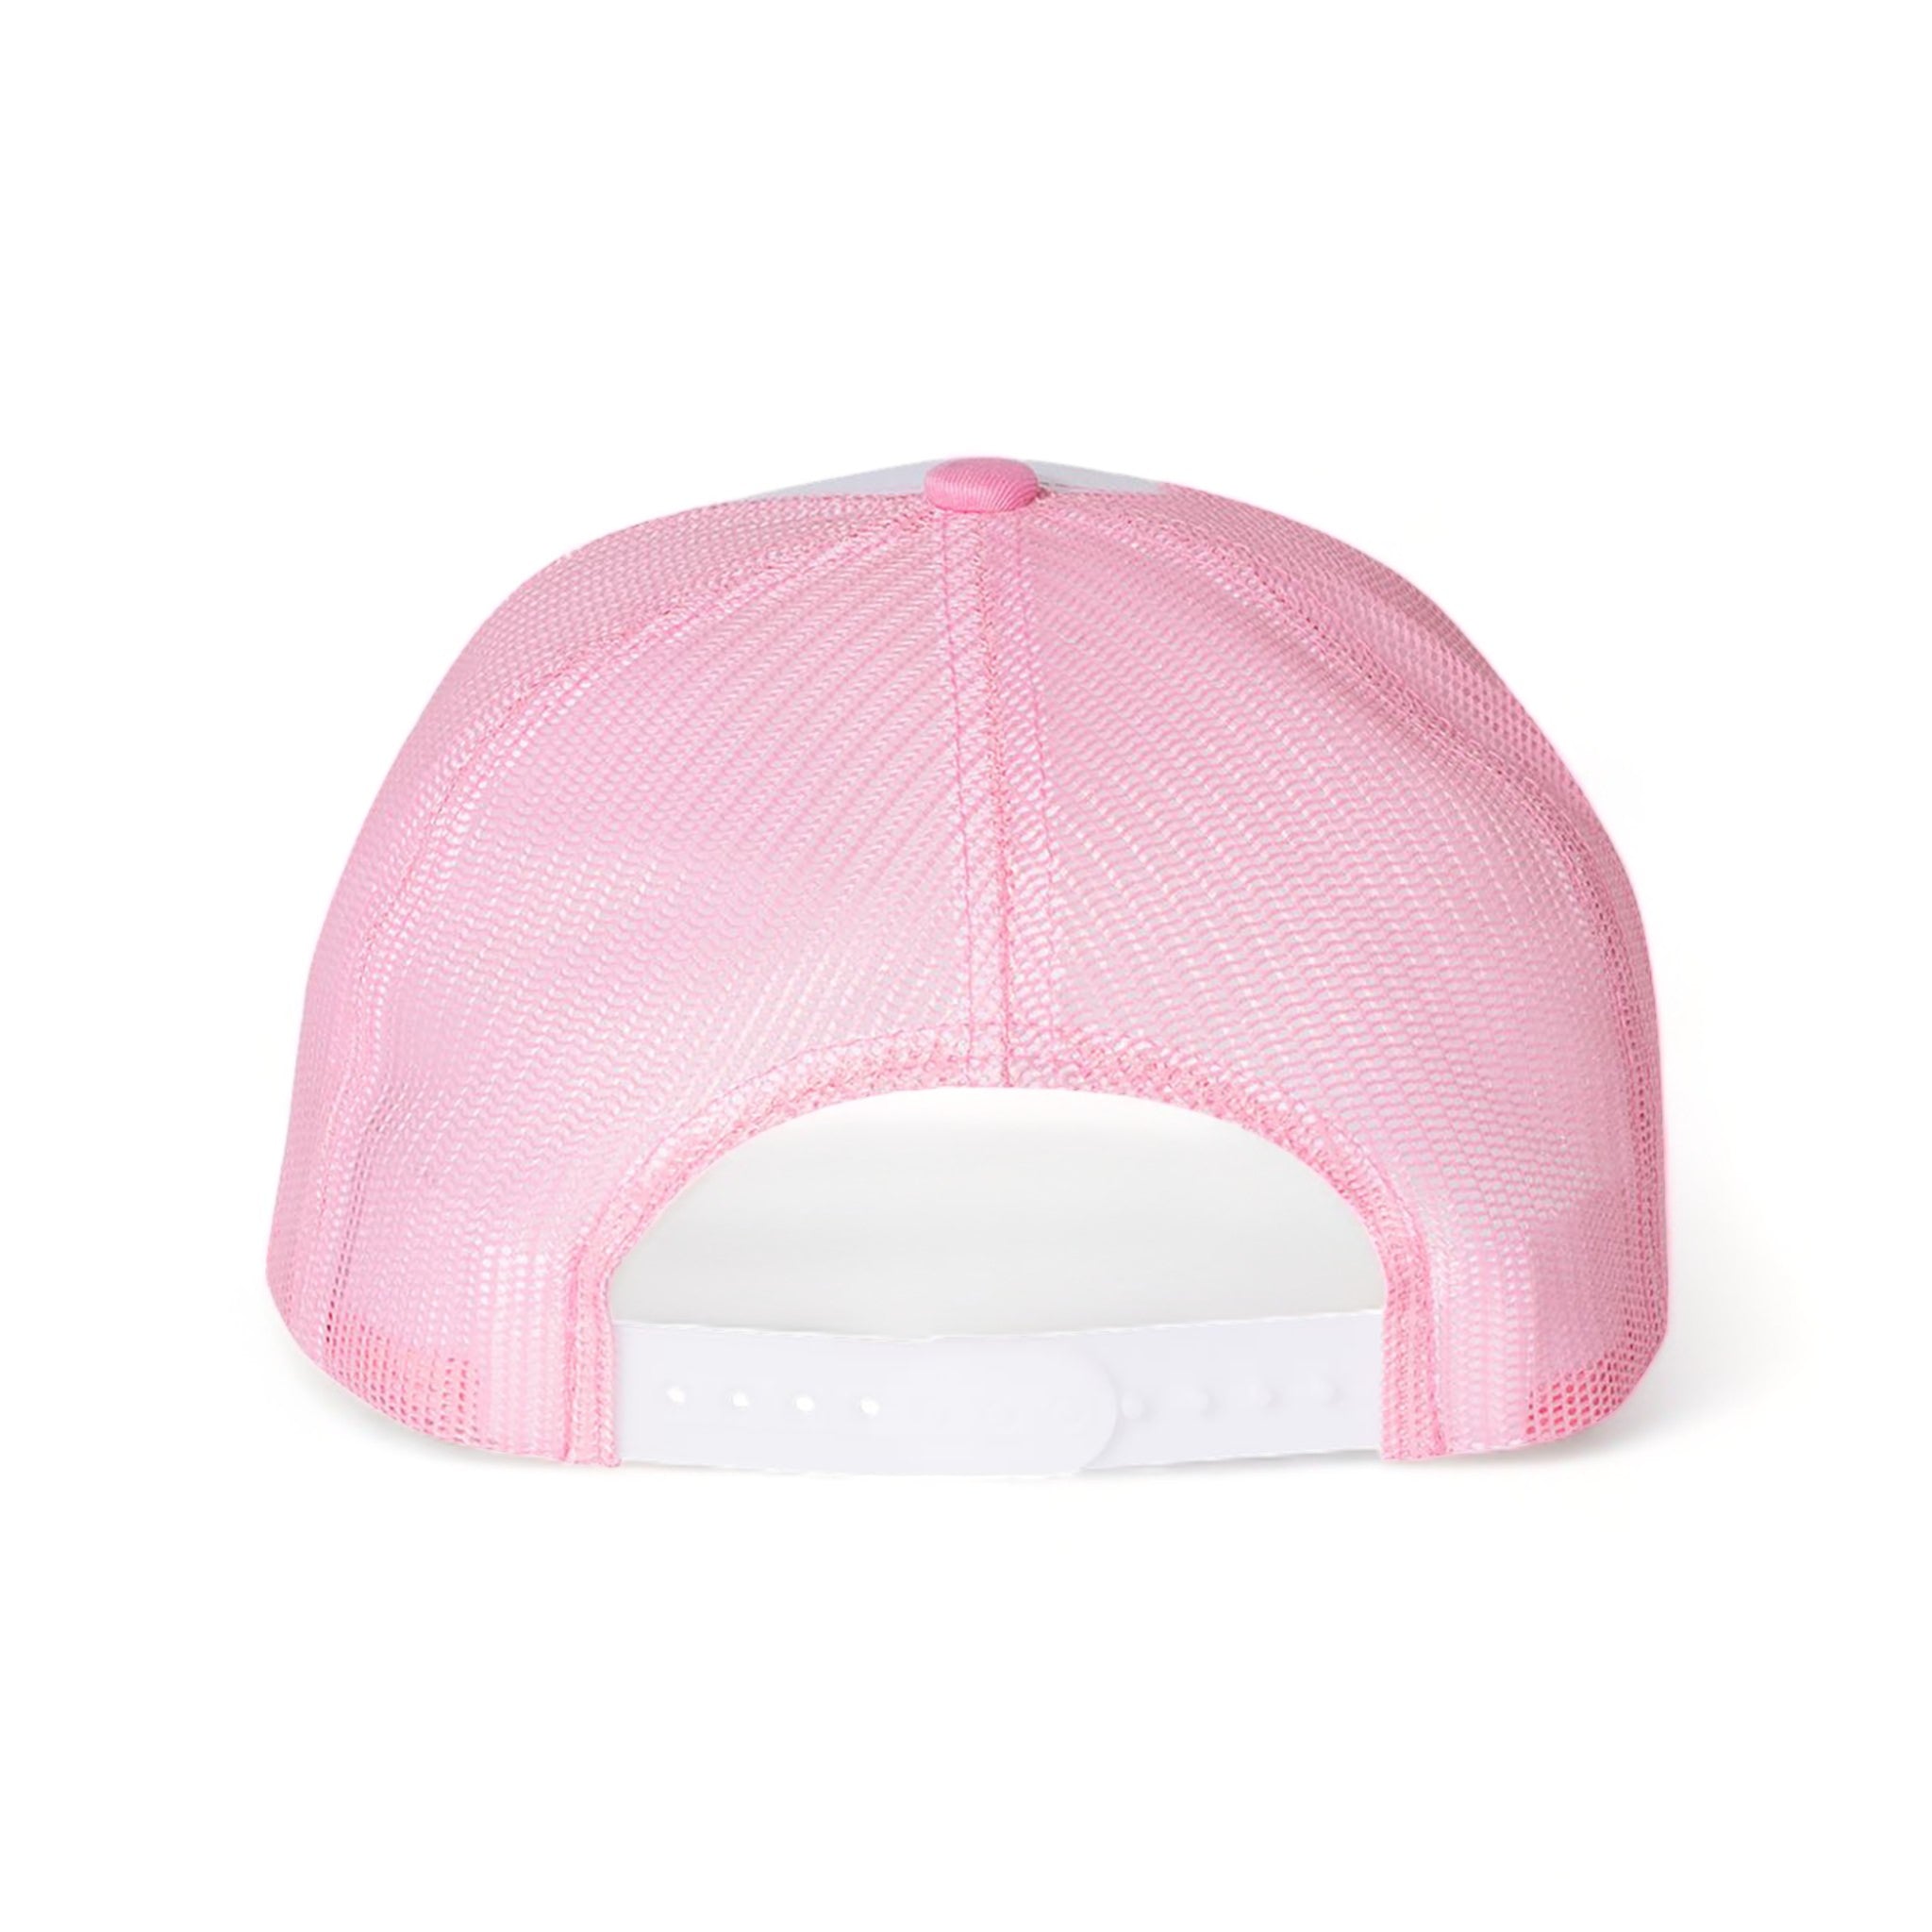 Back view of YP Classics 6006 custom hat in pink, white and pink